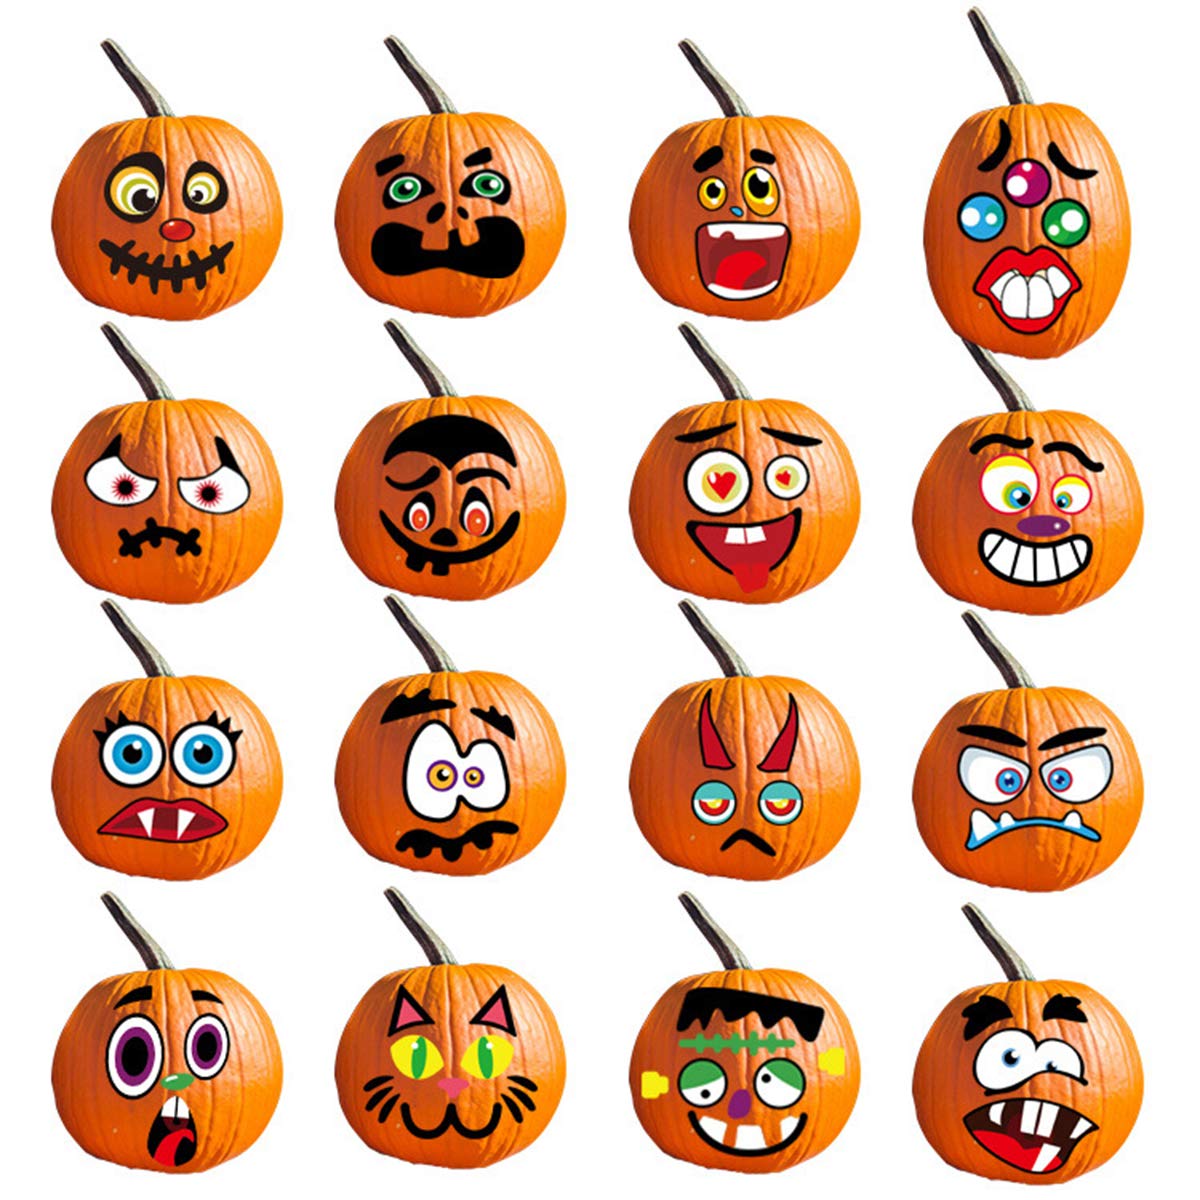 Pumpkin Decorating Halloween Stickers for Kids - Make 60 Funny Face and Classic Pumpkin Expressions Crafts, Holiday Decor Kit Party Best Gift for Kids - 12 Sheet